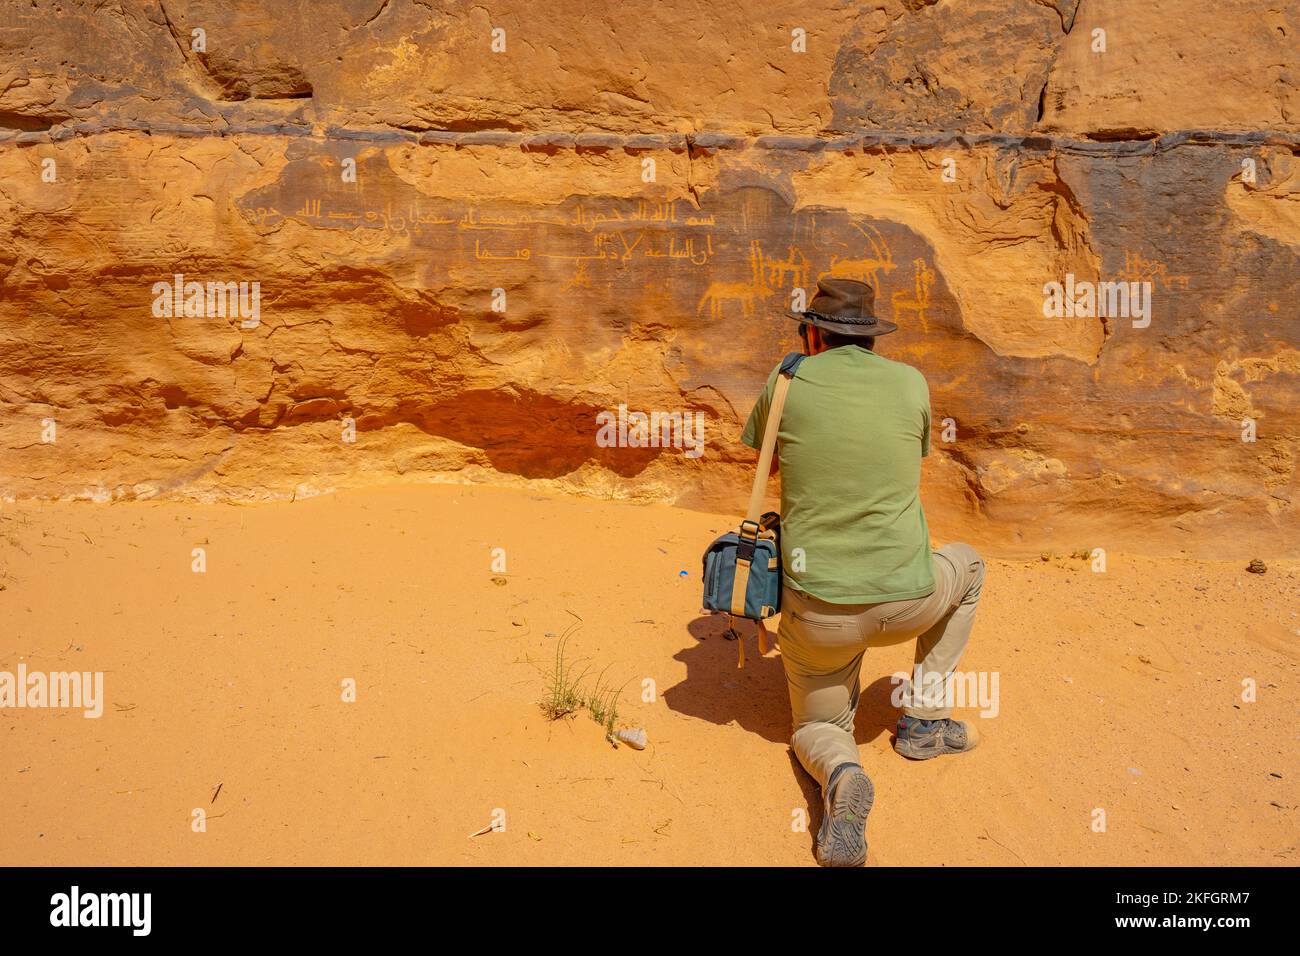 Tourist photographing ancient rock art on a cliff in Wadi Rum Jordan, Stock Photo